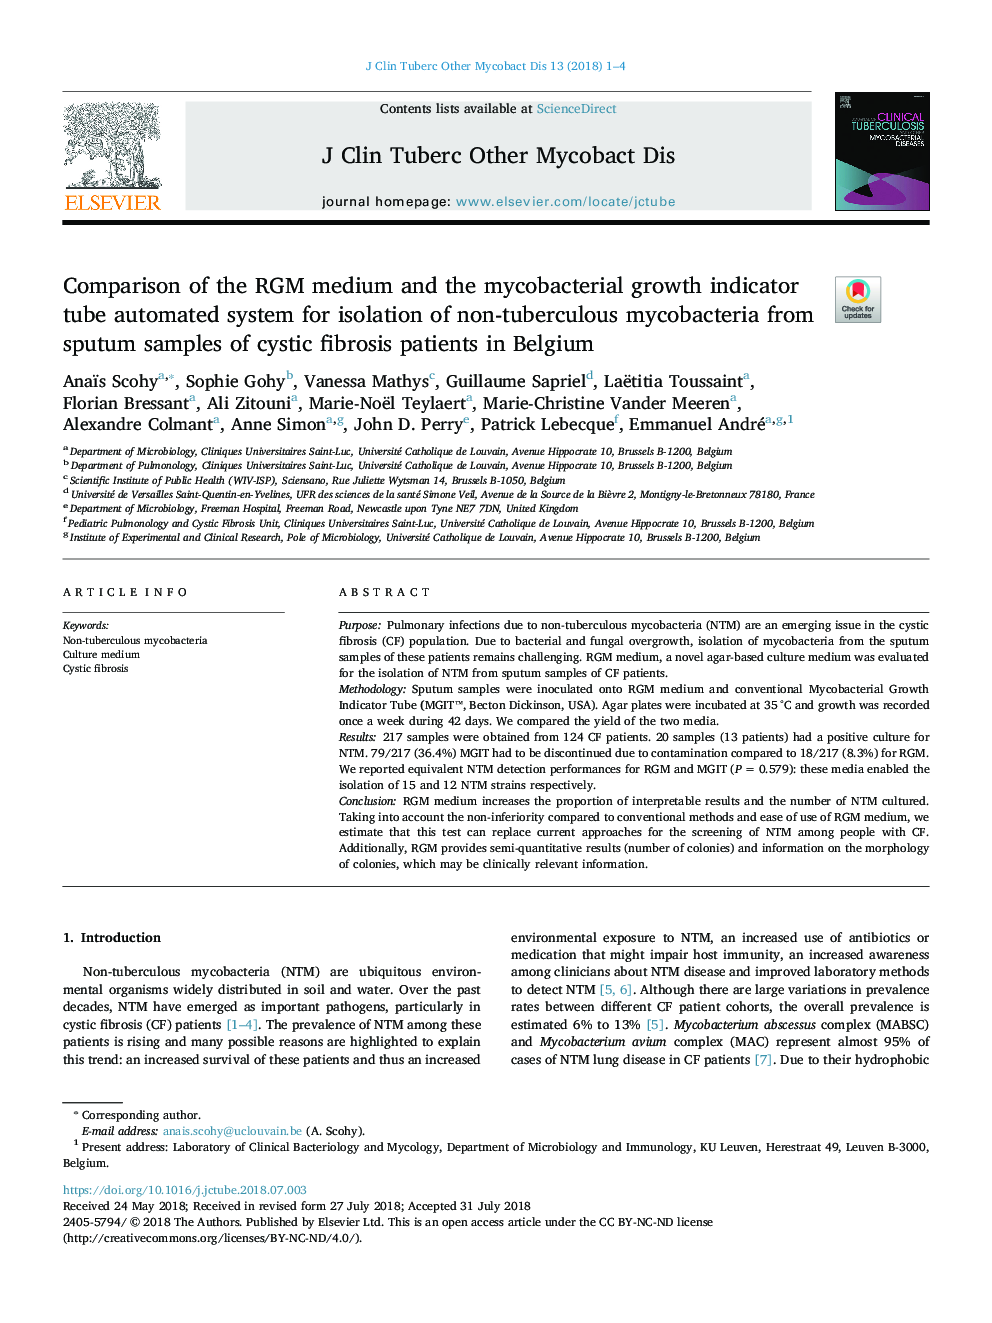 Comparison of the RGM medium and the mycobacterial growth indicator tube automated system for isolation of non-tuberculous mycobacteria from sputum samples of cystic fibrosis patients in Belgium